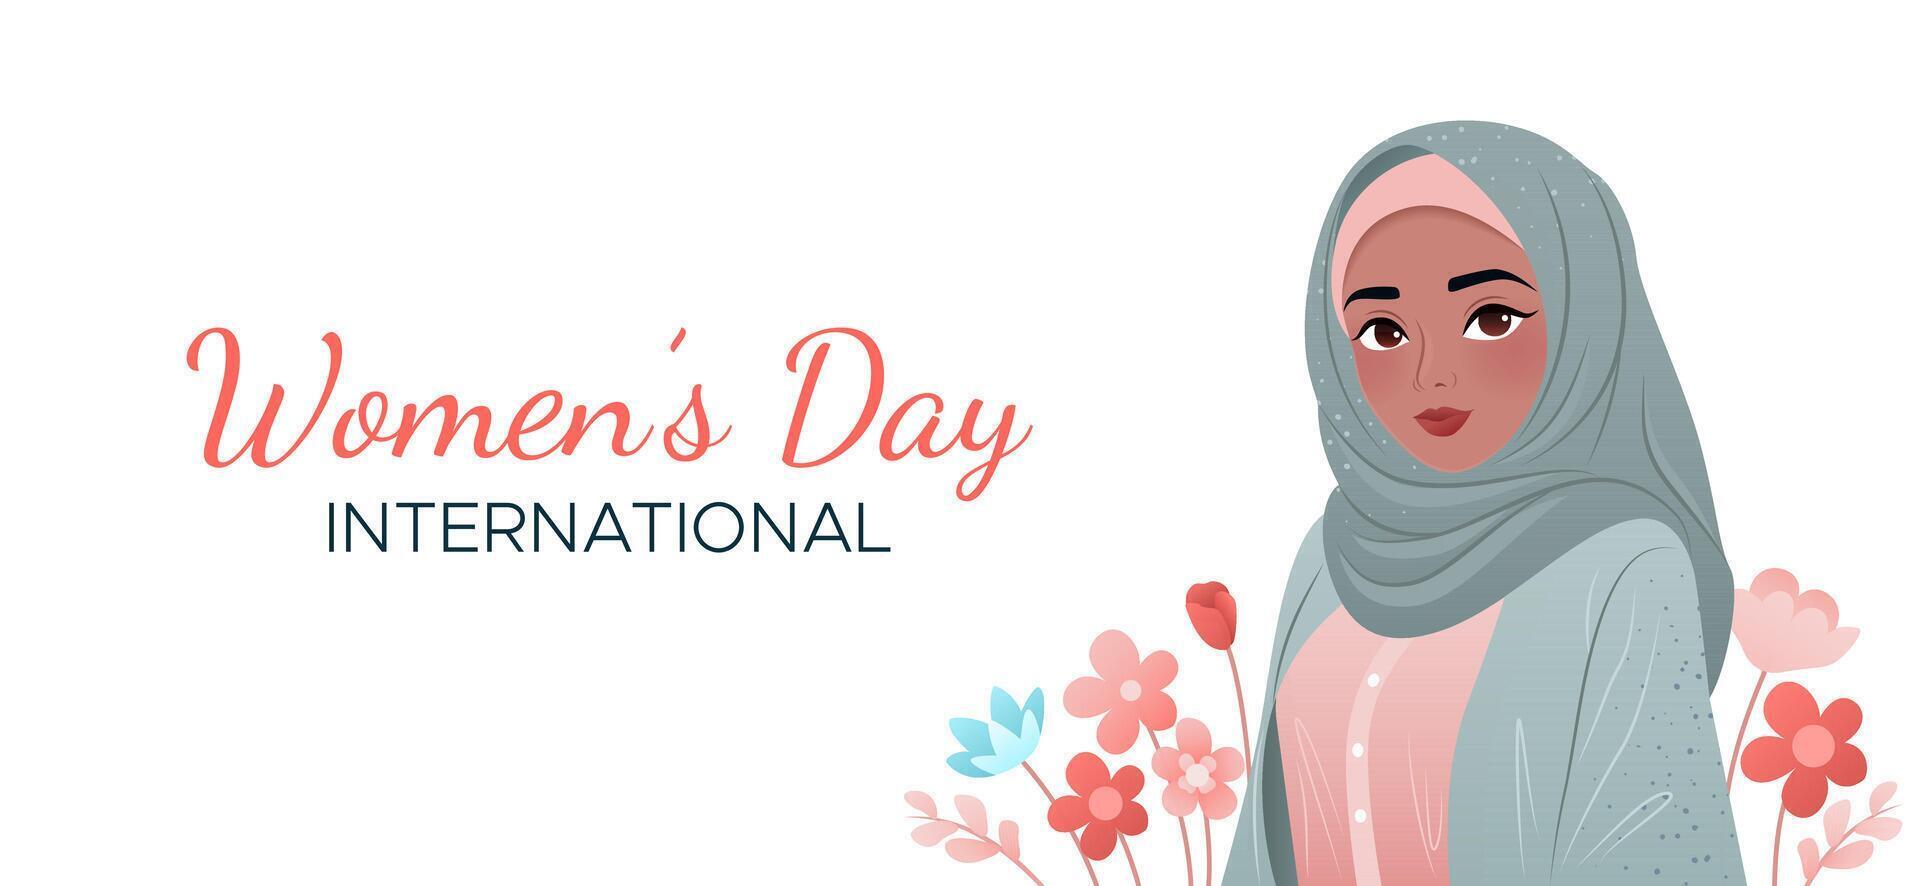 International Women's Day. 8 March banner. Portrait of Muslim woman with flowers. Young girl in hijab. Design for poster, cover, card, campaign, social media post, postcard. Vector illustration.